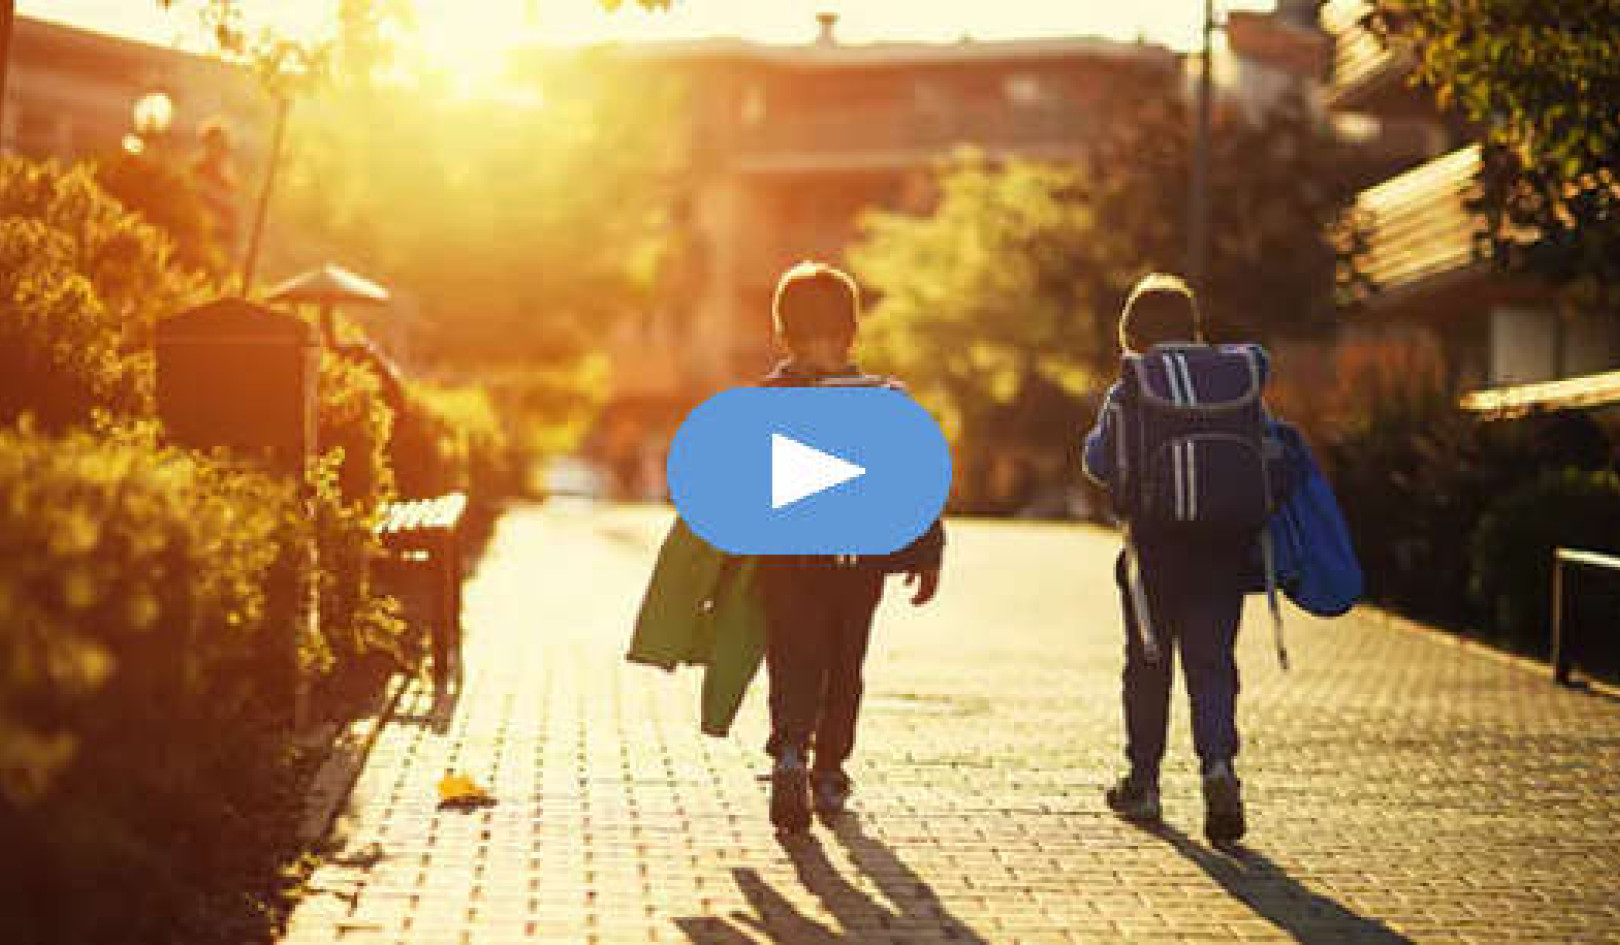 Do kids free to roam on their own feel more confident in adulthood? (Video)